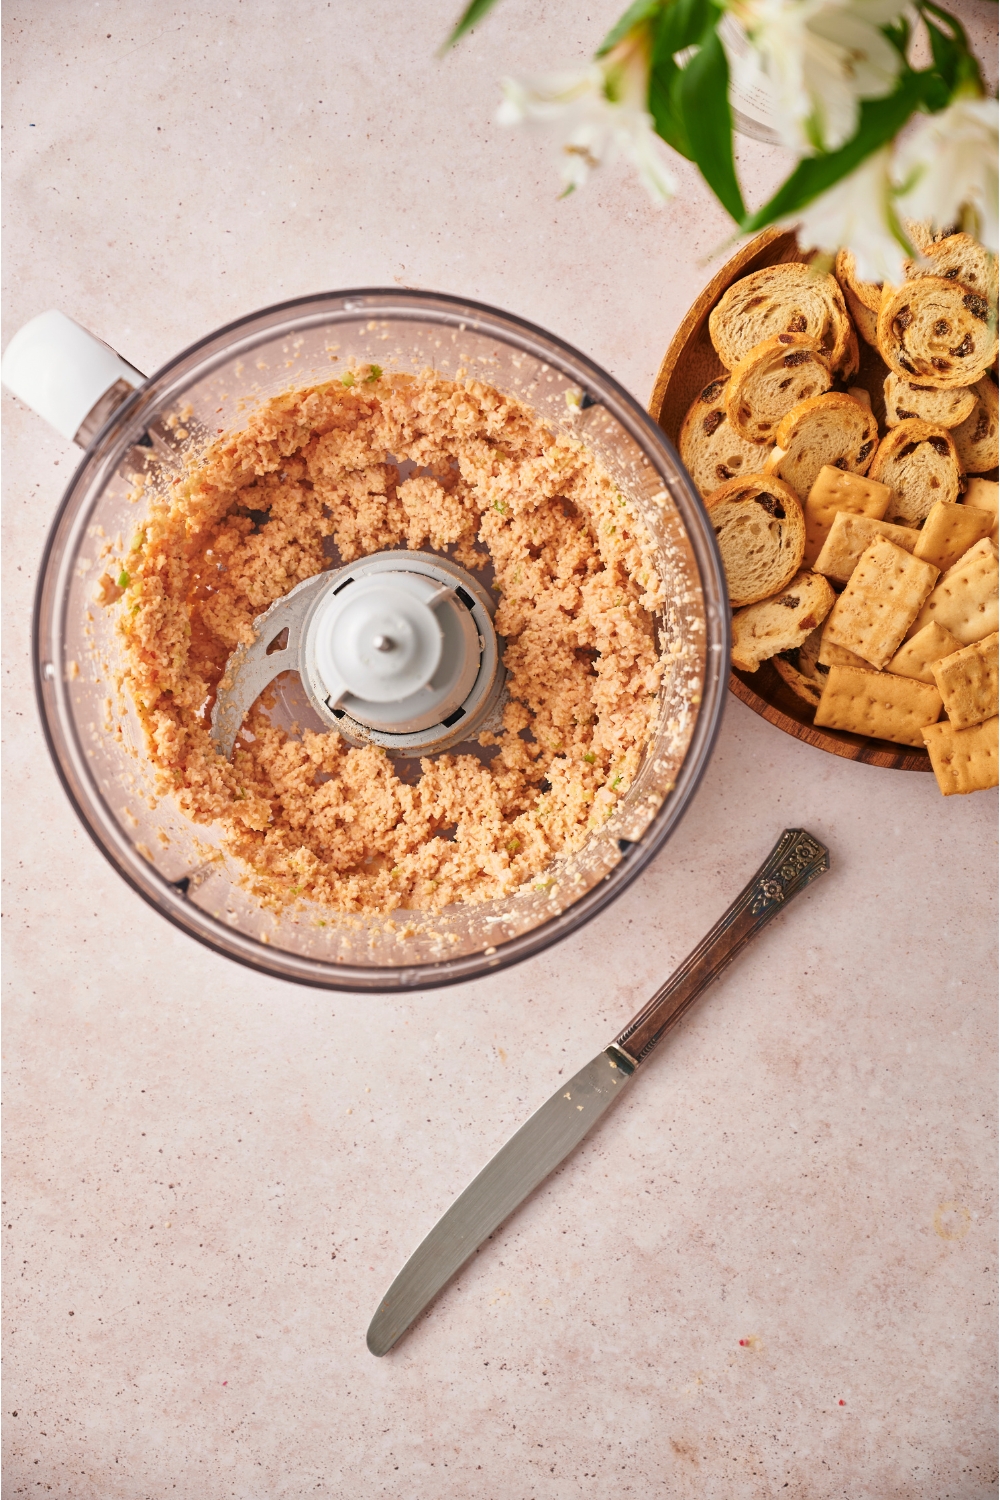 Food processor with processed ham mixture next to a knife and a plate of crackers and bread.